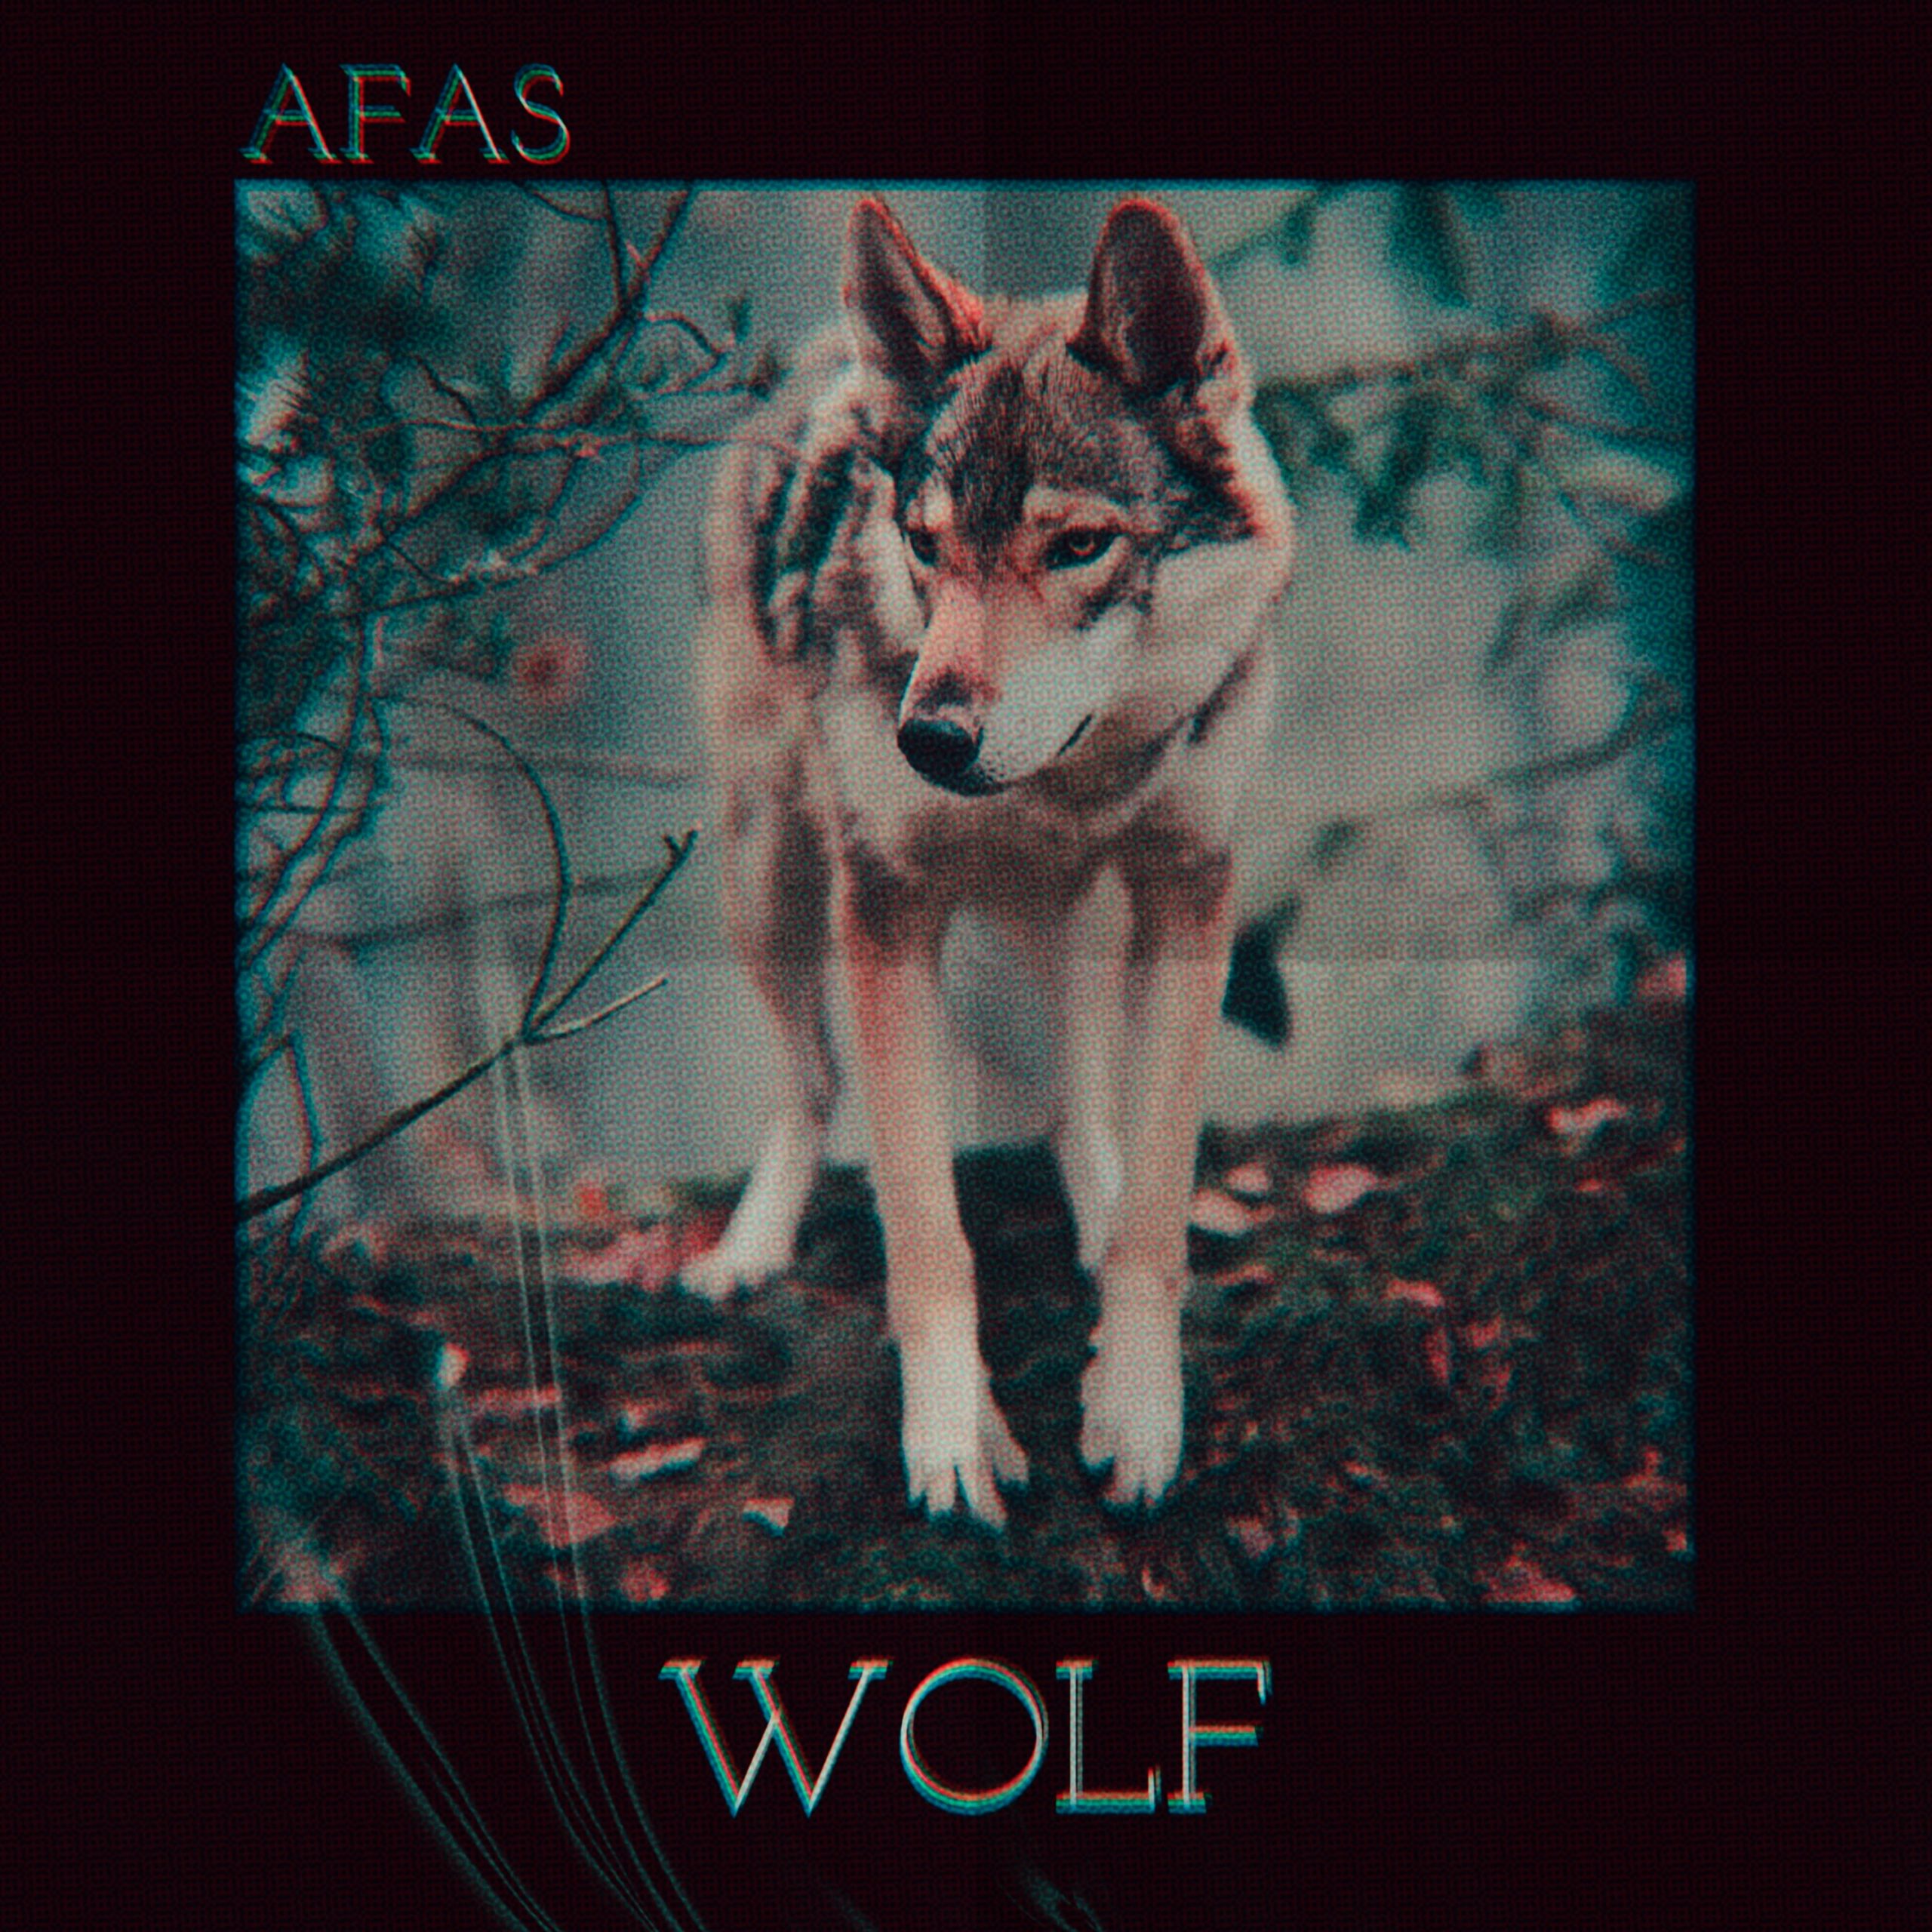 With a Seductive Booming Hip-Hop Attack and Trap Mystery, ‘The Wolf’ from ‘AFAS’  is on the loose